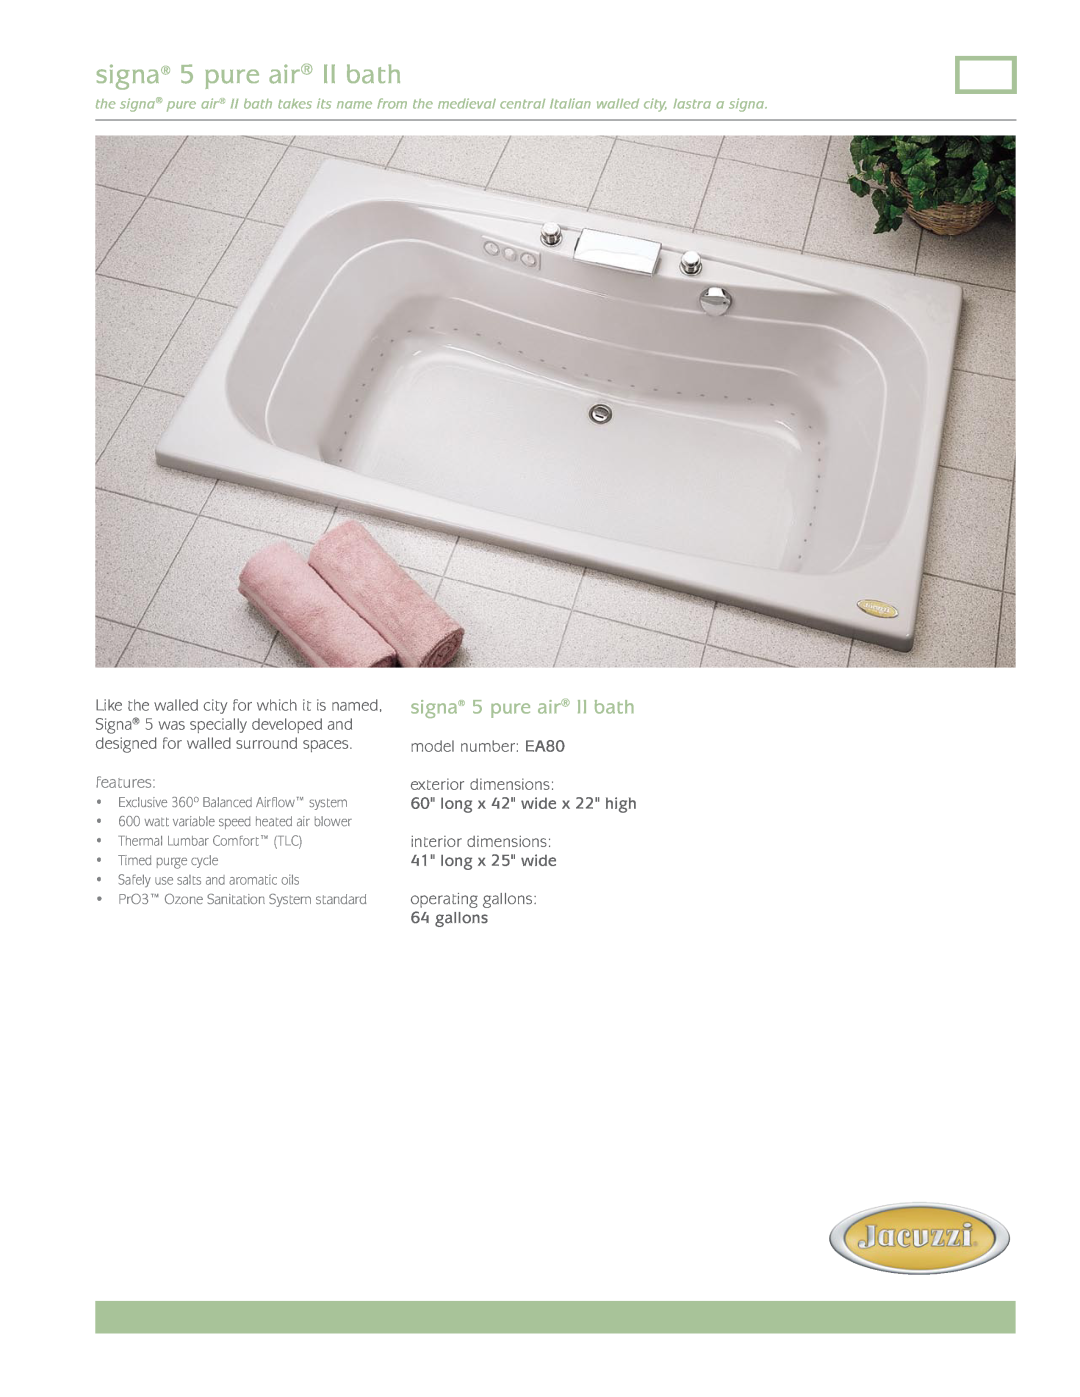 Jacuzzi EA80 dimensions signa 5 pure air II bath, features, Exclusive 360º Balanced Airflow system 